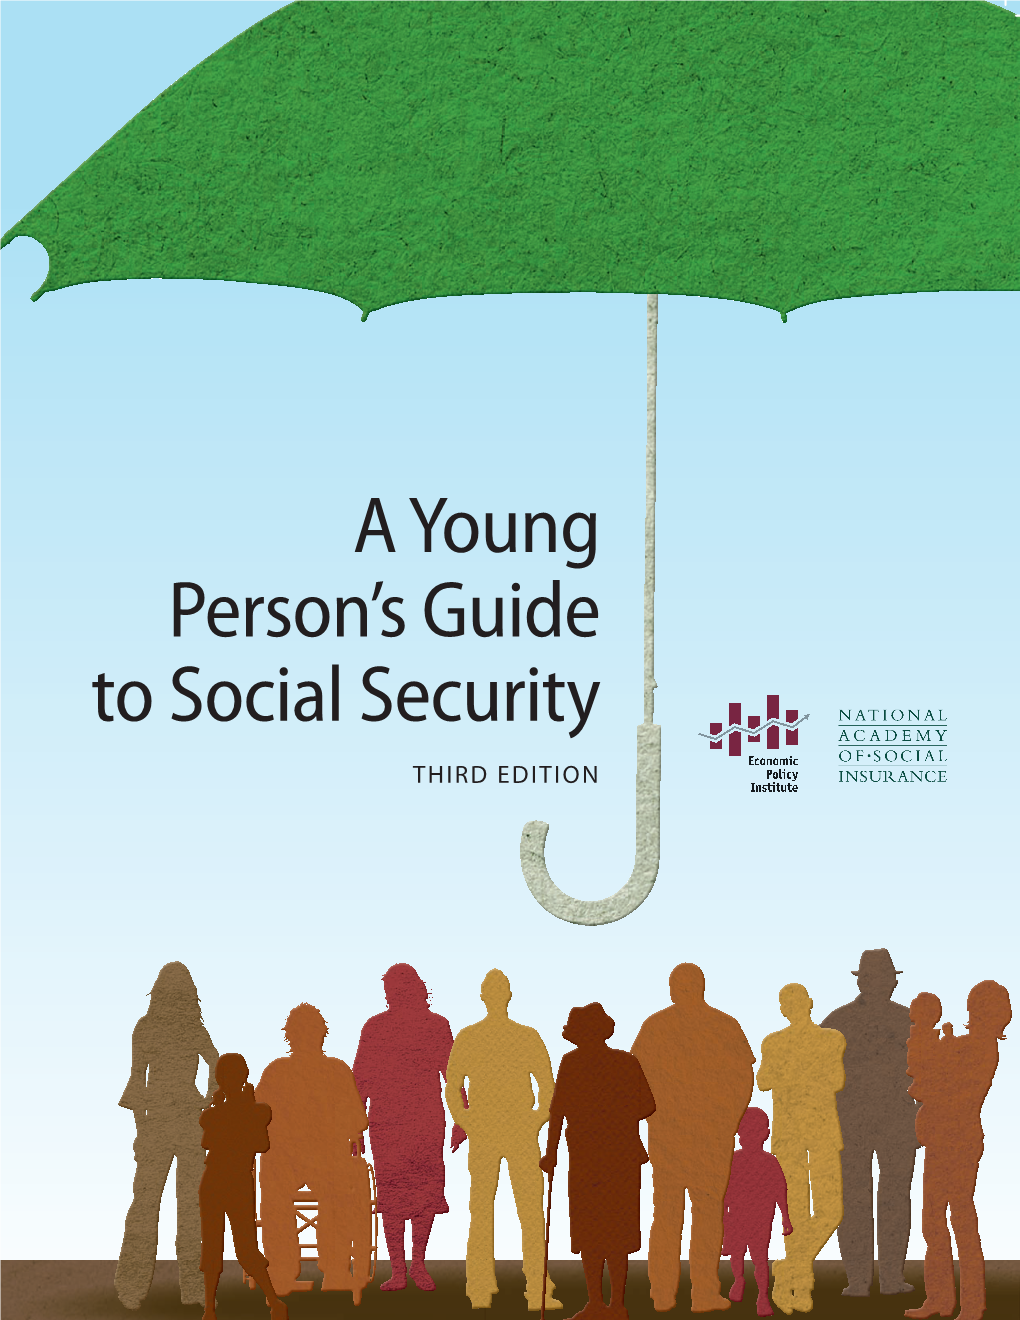 A Young Person's Guide to Social Security, Third Edition